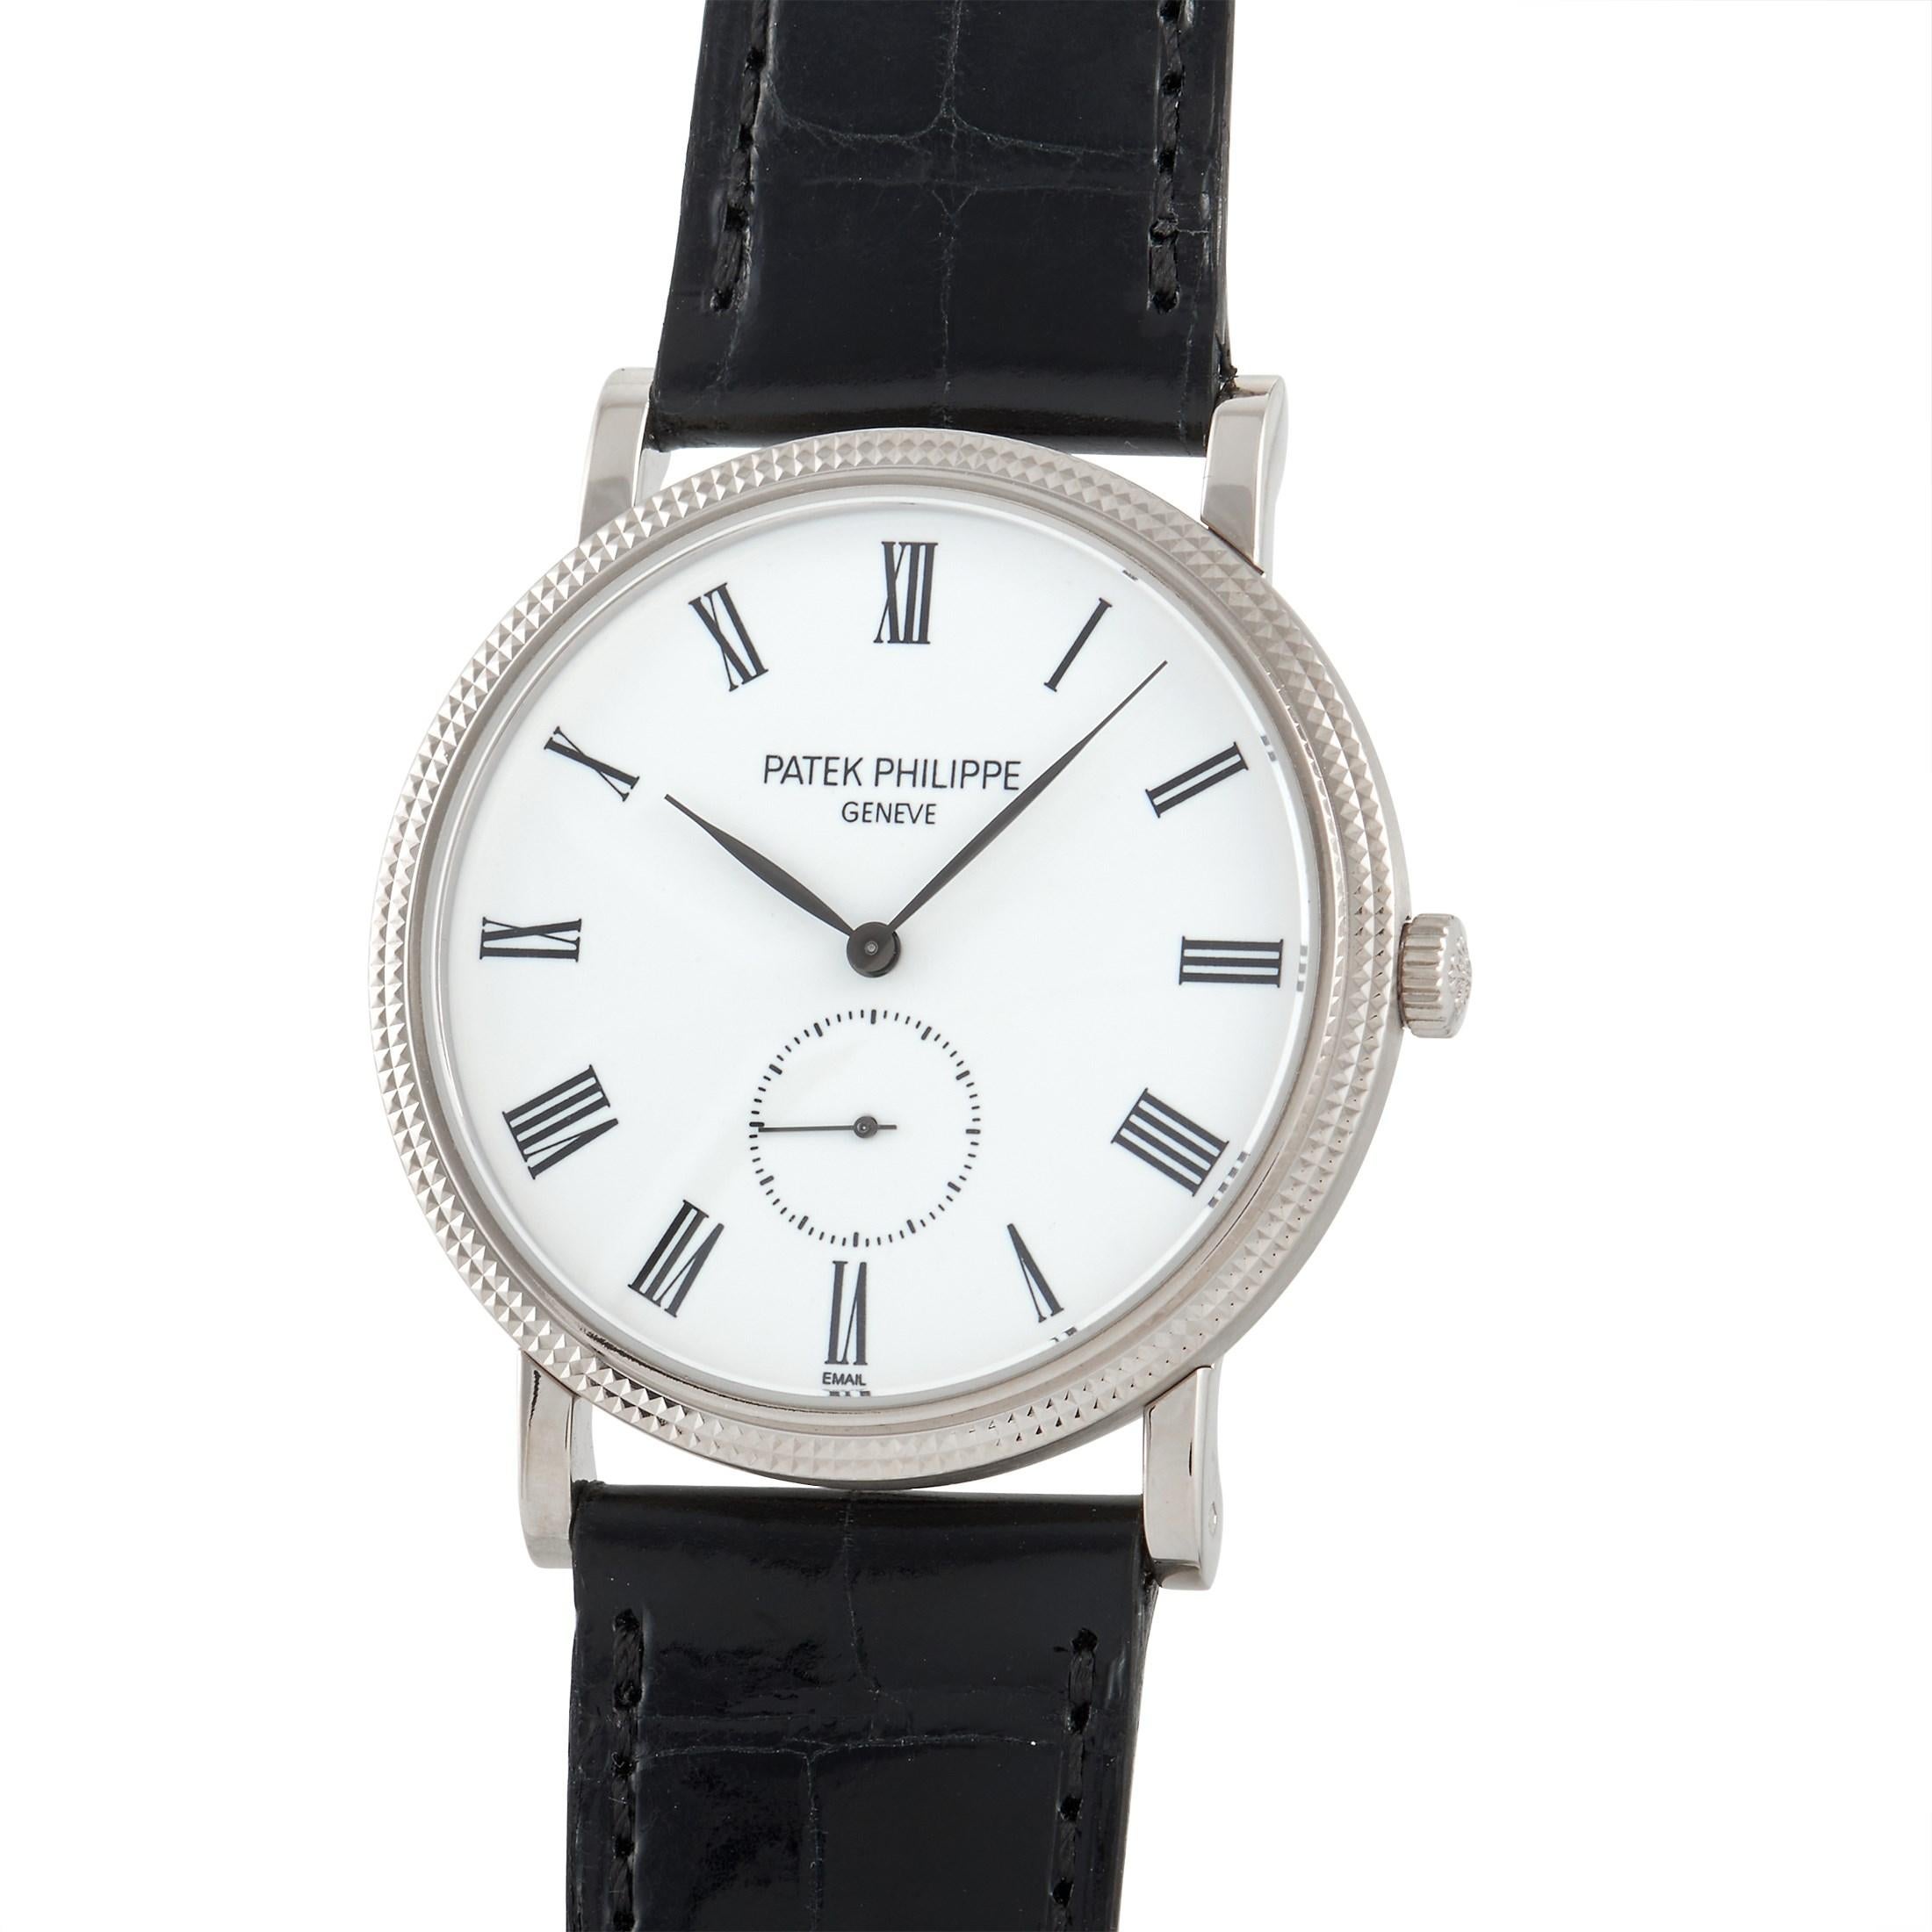 The Patek Philippe Calatrava Watch, reference number 5116G, possesses a striking sense of simplicity. 

On this minimalist timepiece, you’ll find a round 36mm case made from 18k White Gold attached to a sleek black alligator strap. The striking